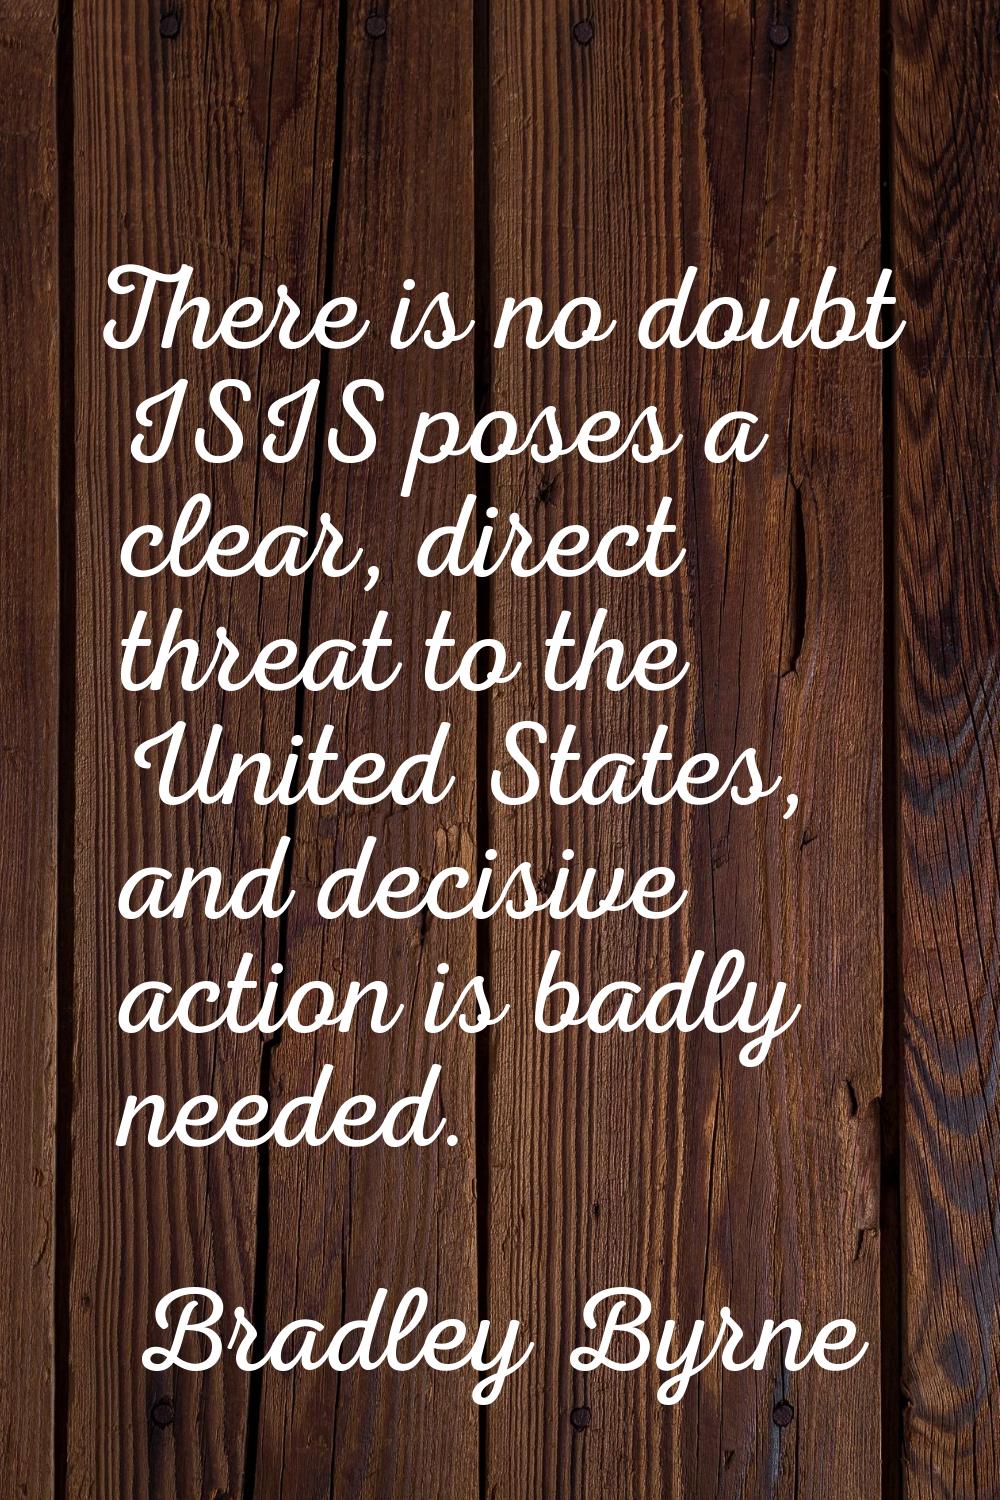 There is no doubt ISIS poses a clear, direct threat to the United States, and decisive action is ba